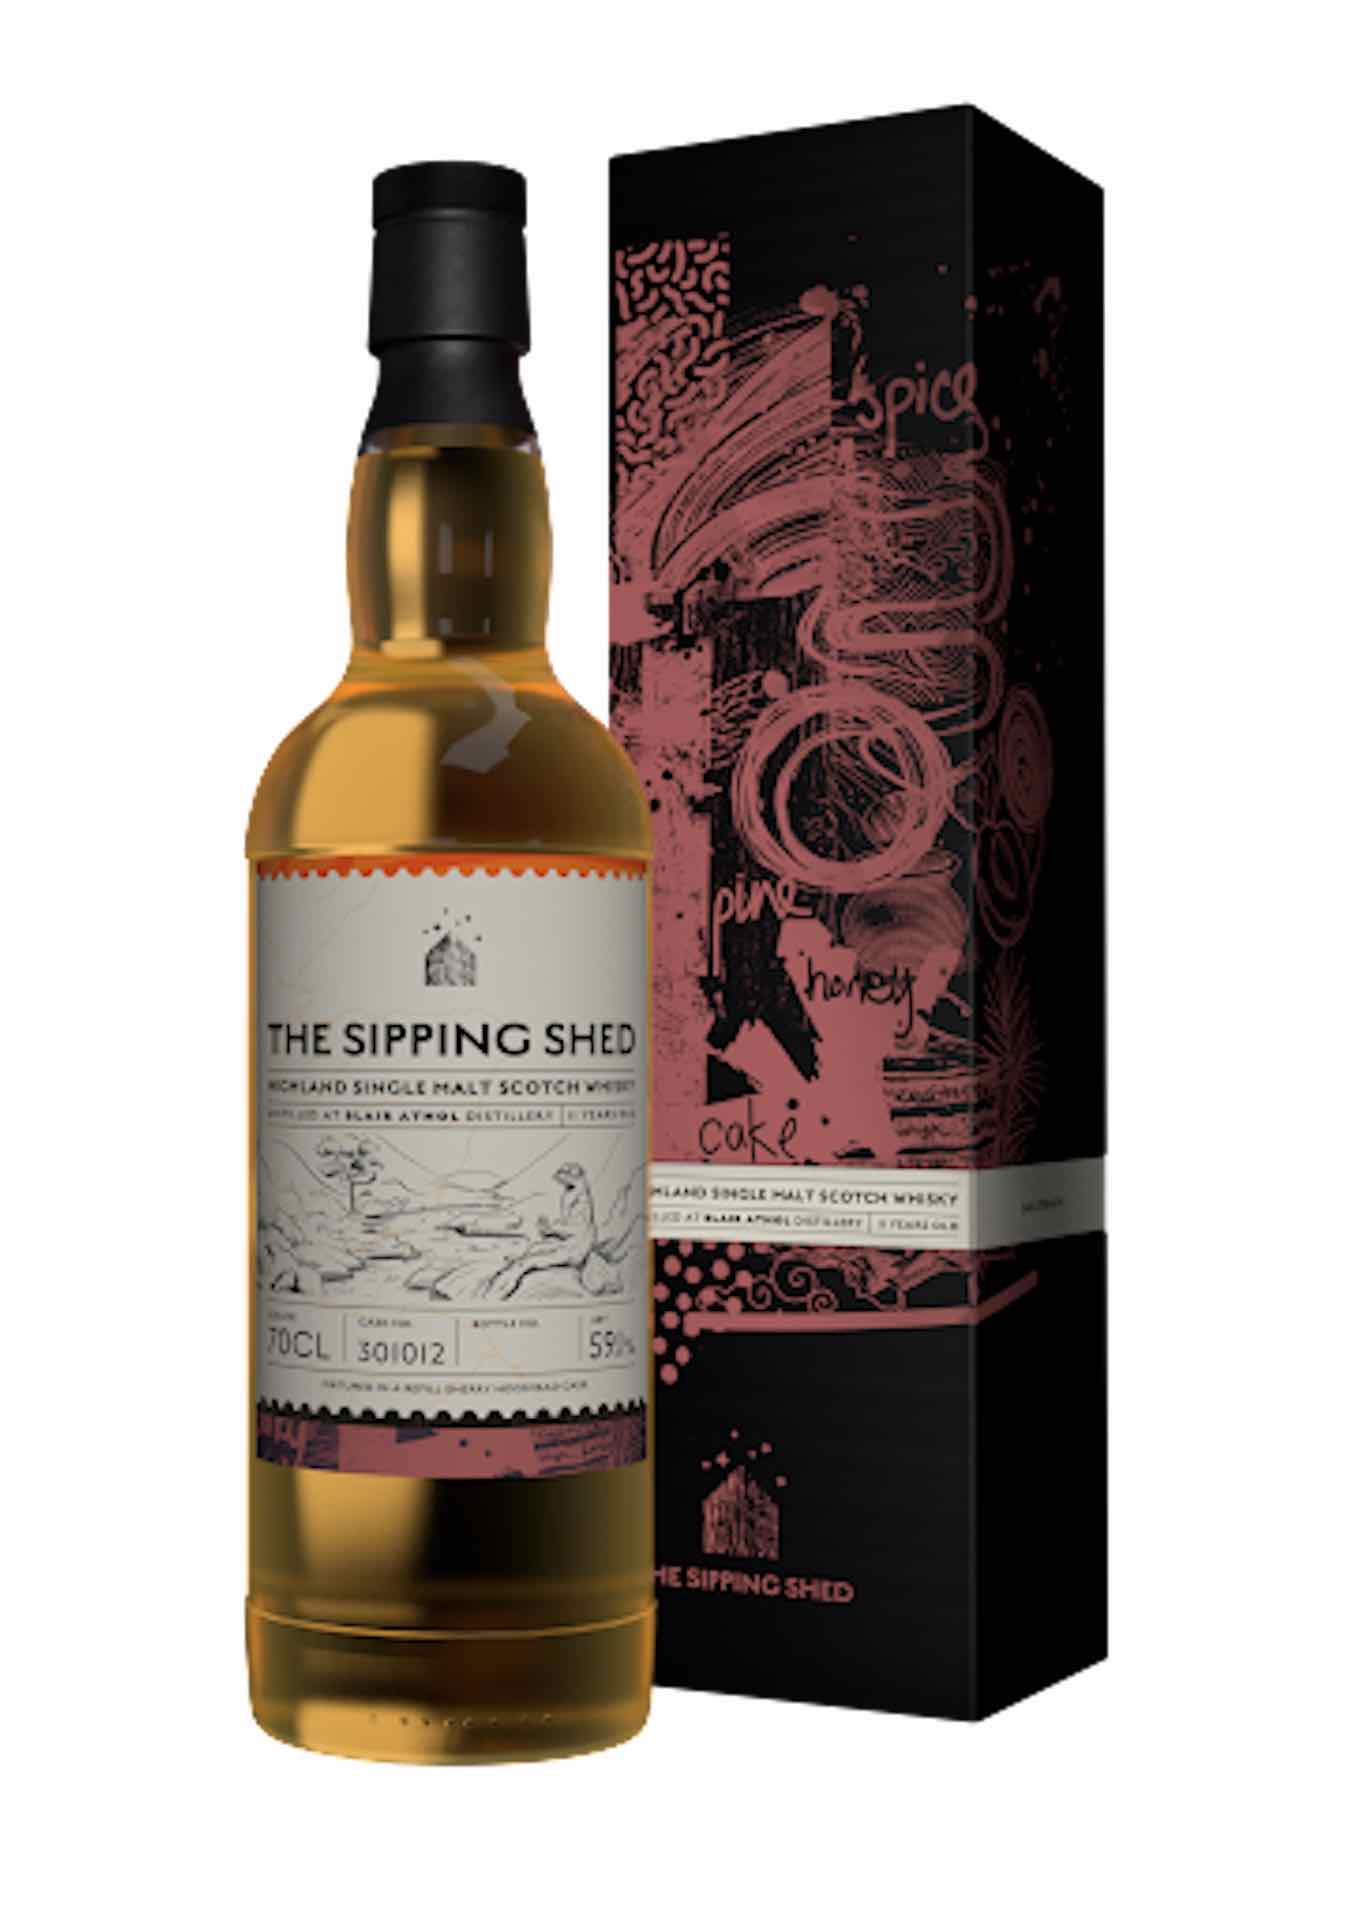 The Sipping Shed Blair Athol 11 Year Old Single Cask Whisky